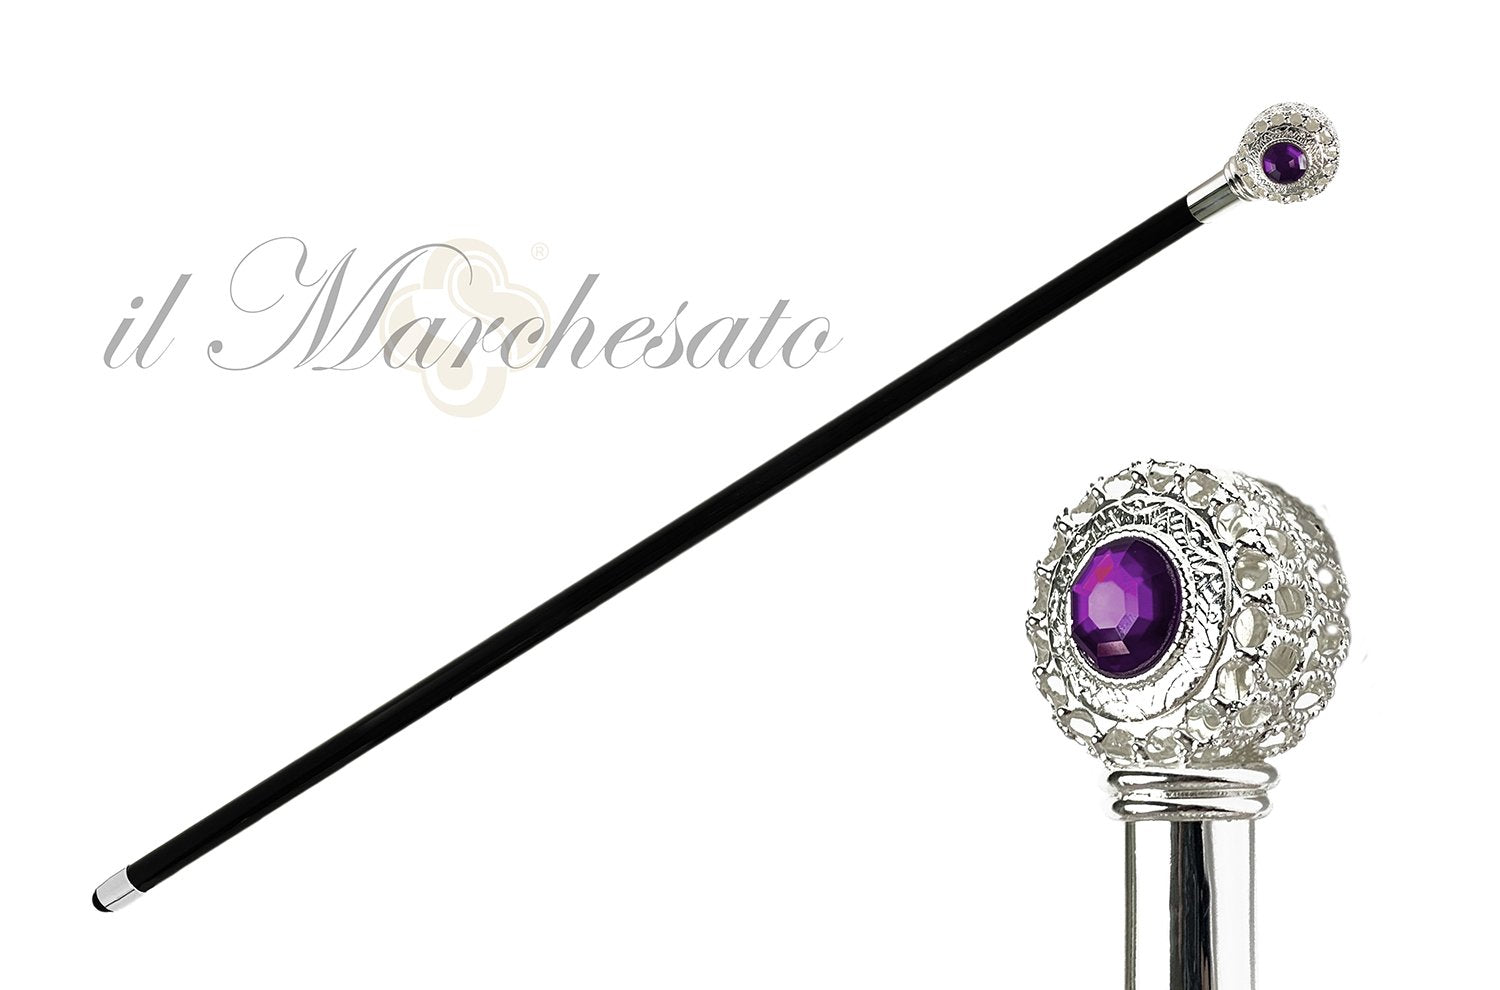 Luxury Evening Walking Stick Silver Plated Handle - IL MARCHESATO LUXURY UMBRELLAS, CANES AND SHOEHORNS